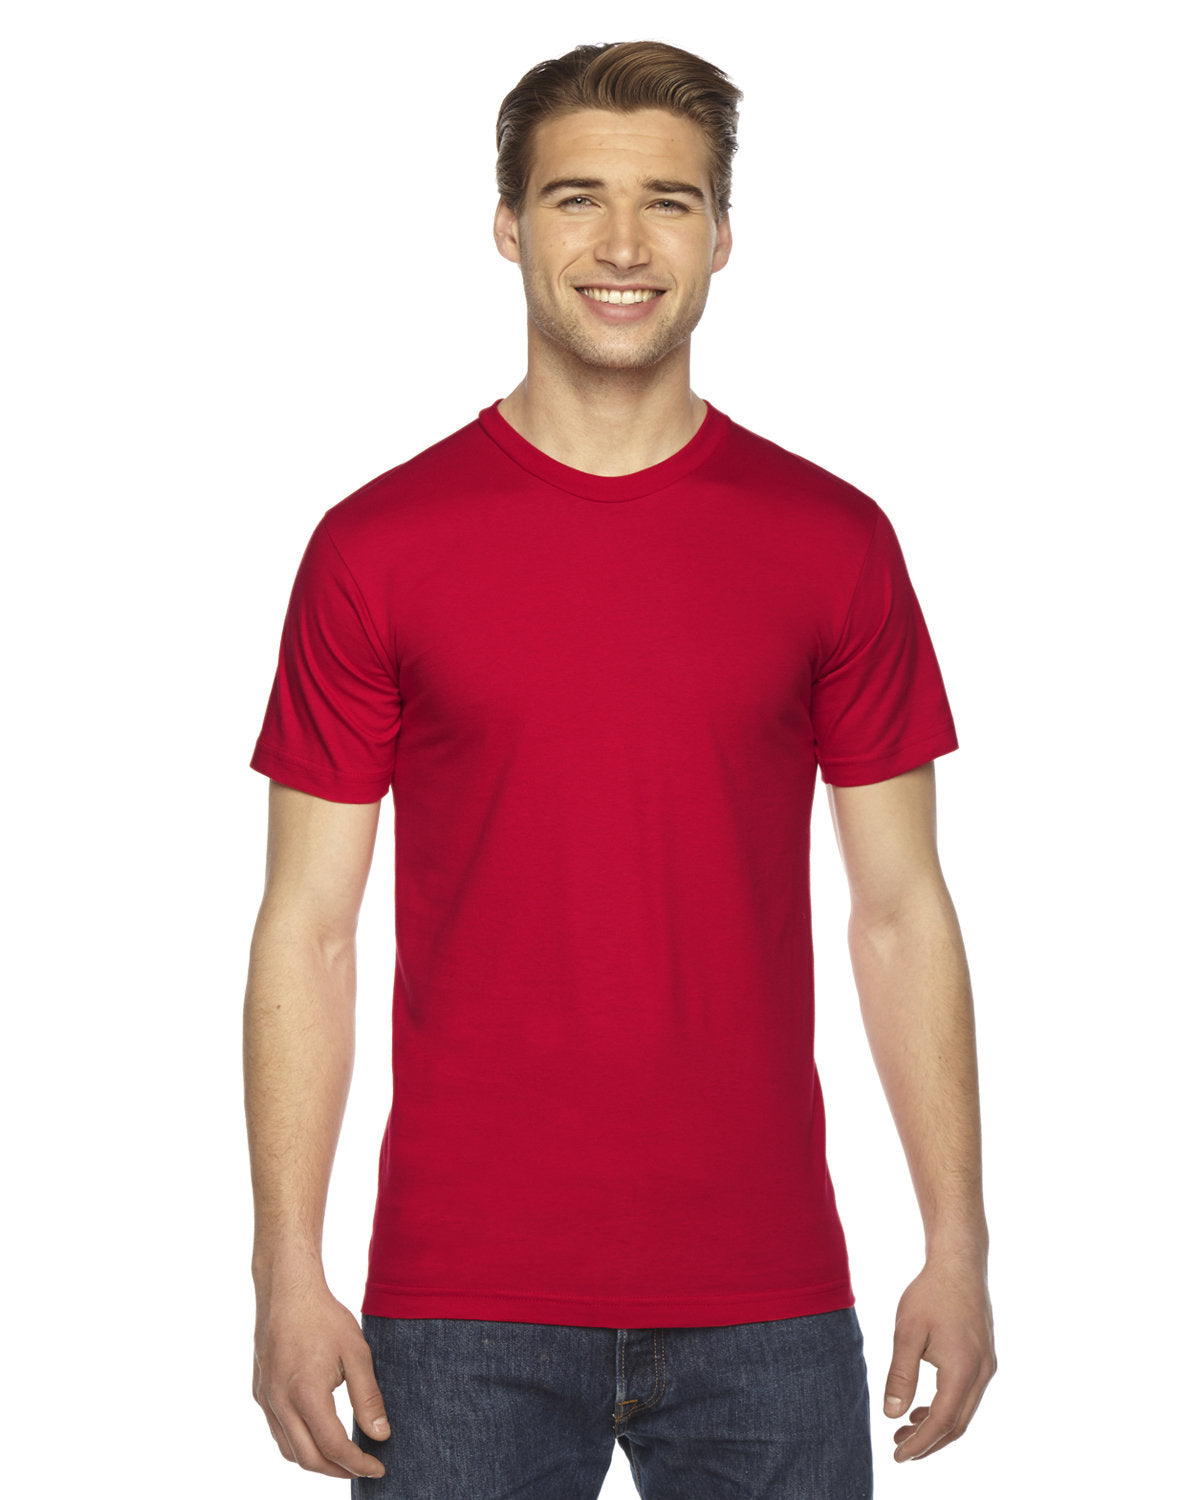 Adult T-Shirt - SoftTouch - Bely Premium Cotton